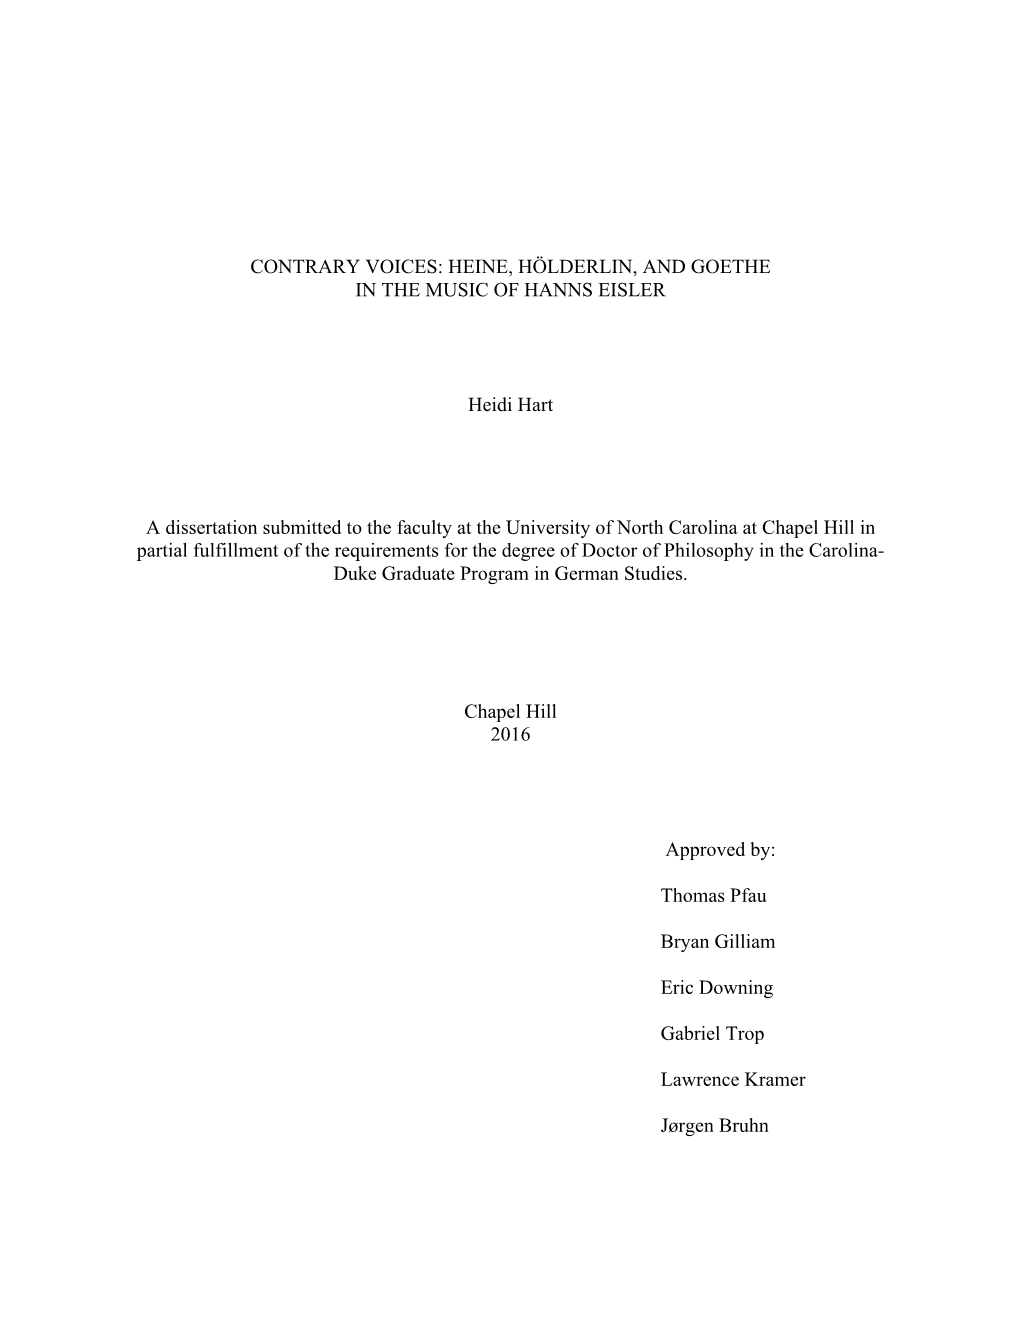 HEINE, HÖLDERLIN, and GOETHE in the MUSIC of HANNS EISLER Heidi Hart a Dissertation Submitted to the Faculty